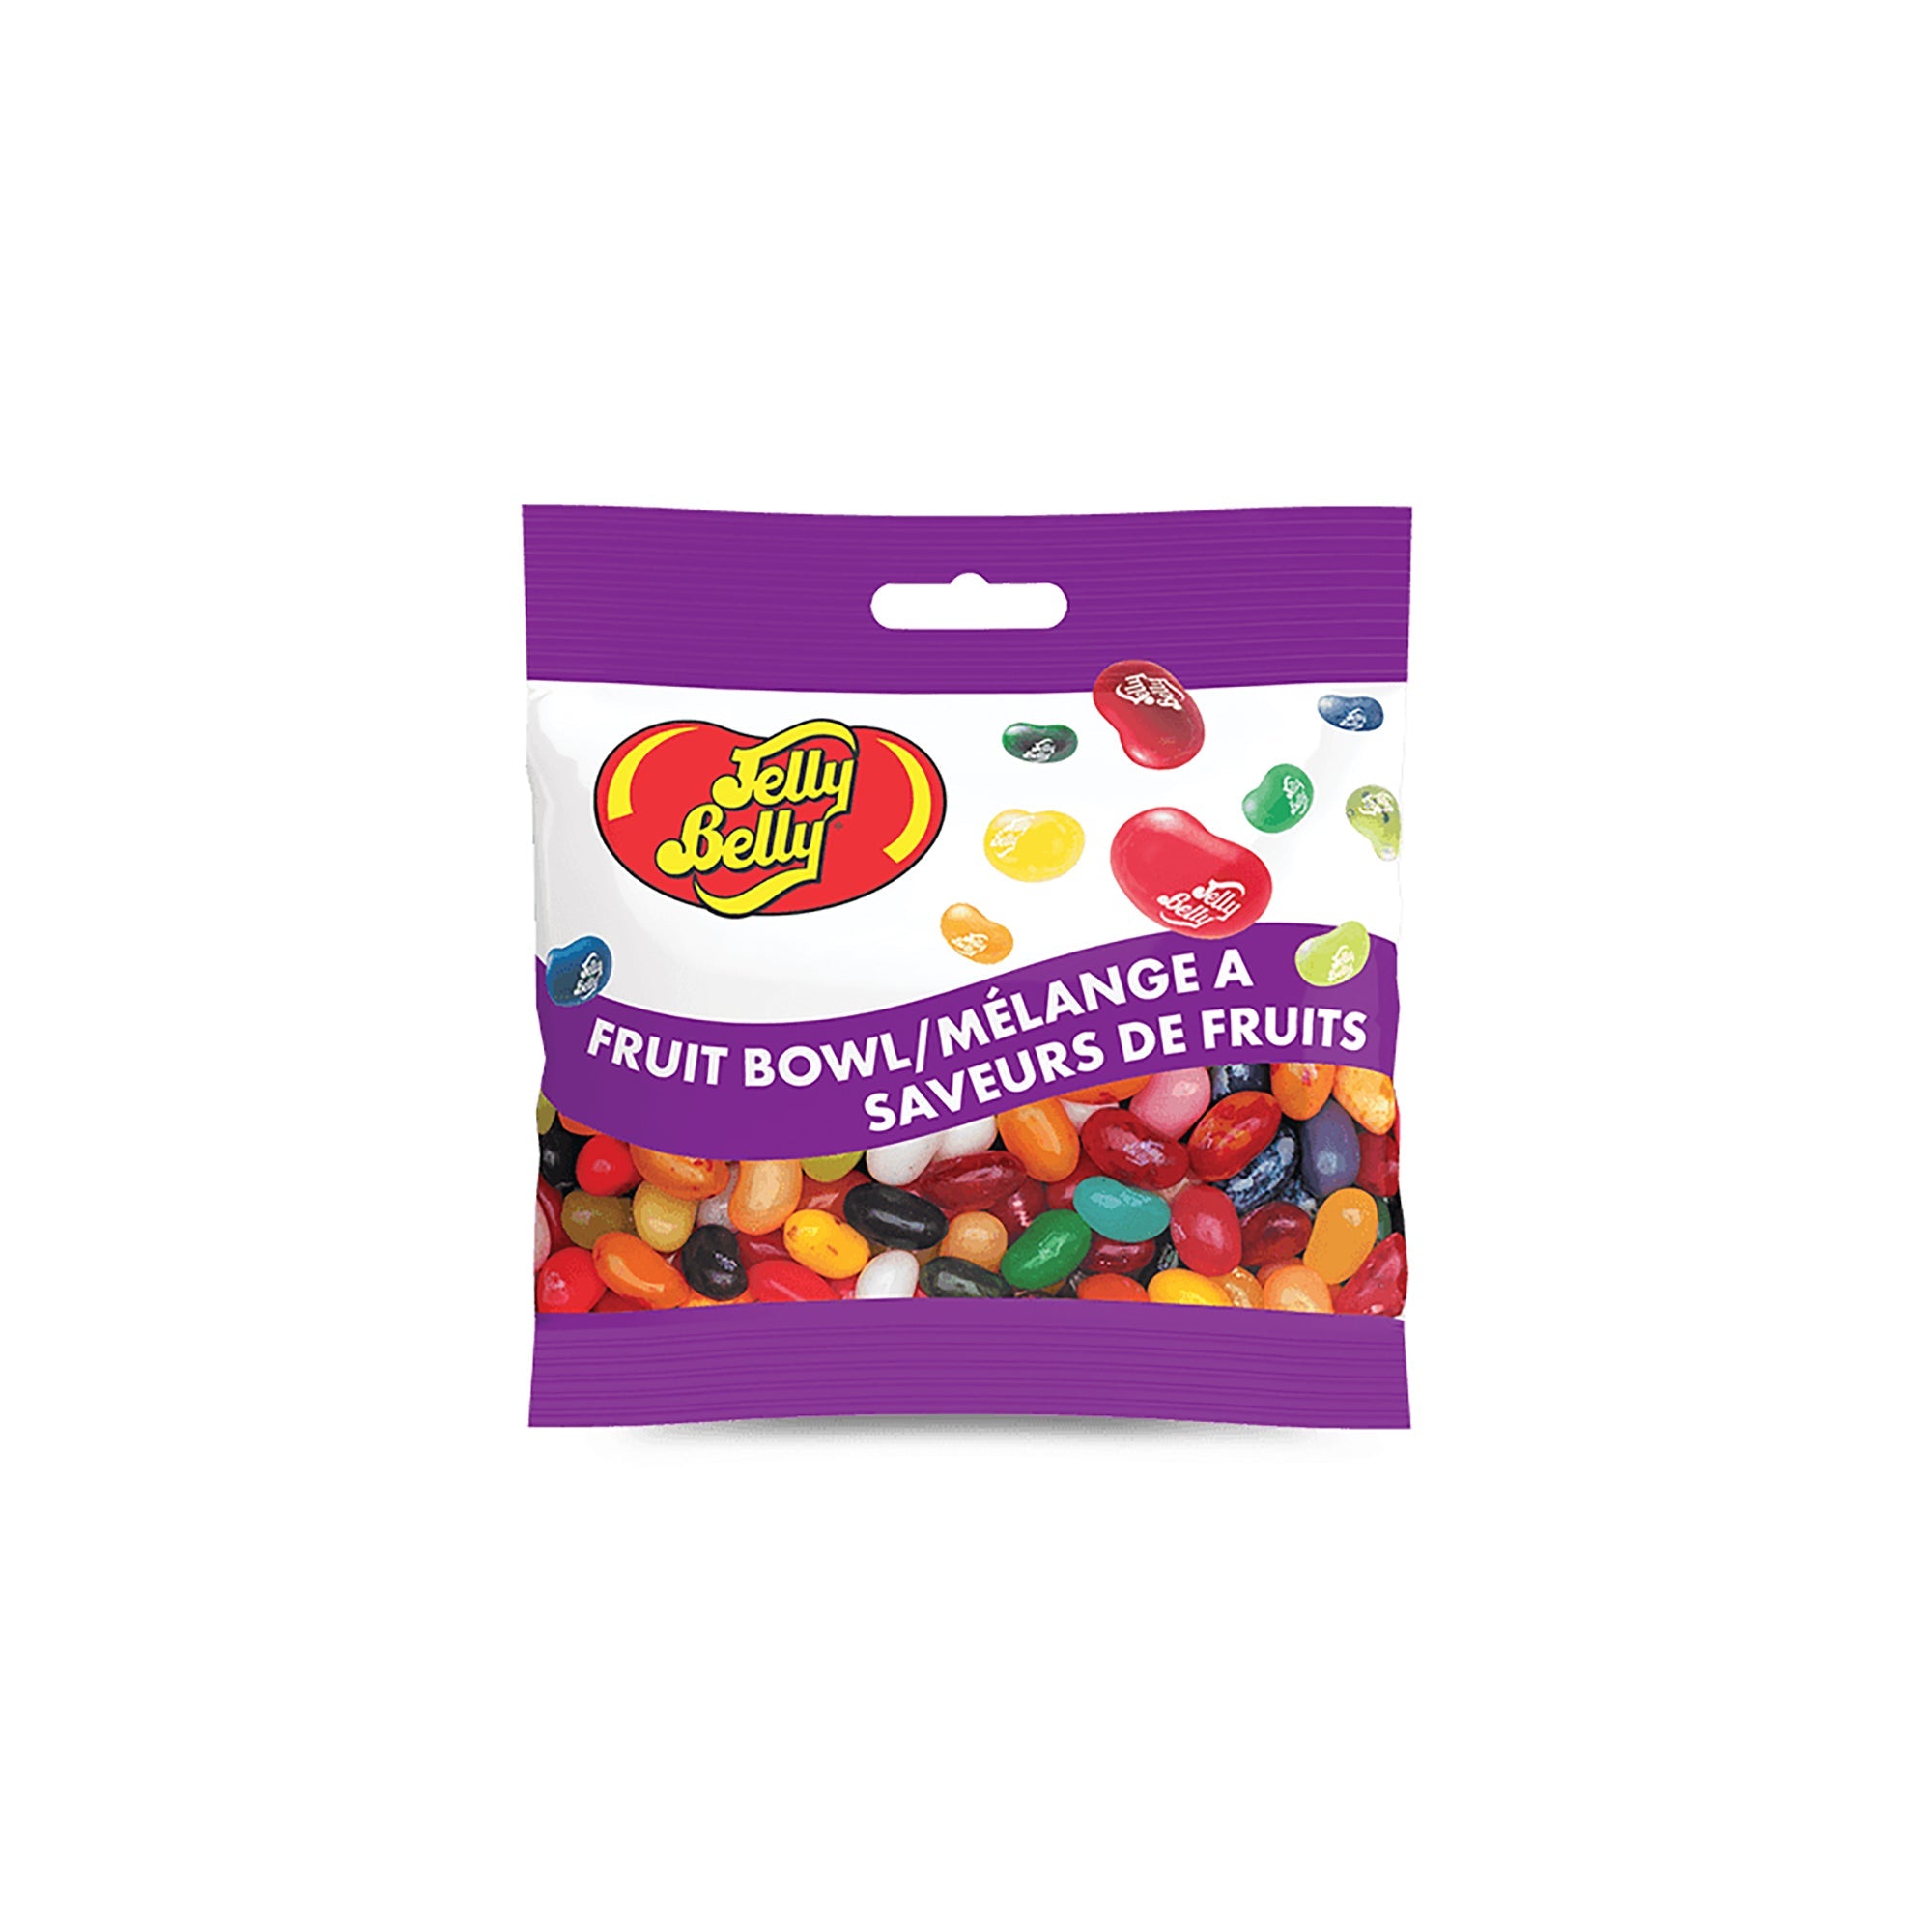 Jelly Belly Fruit Bowl Jelly Bean Candy 100g